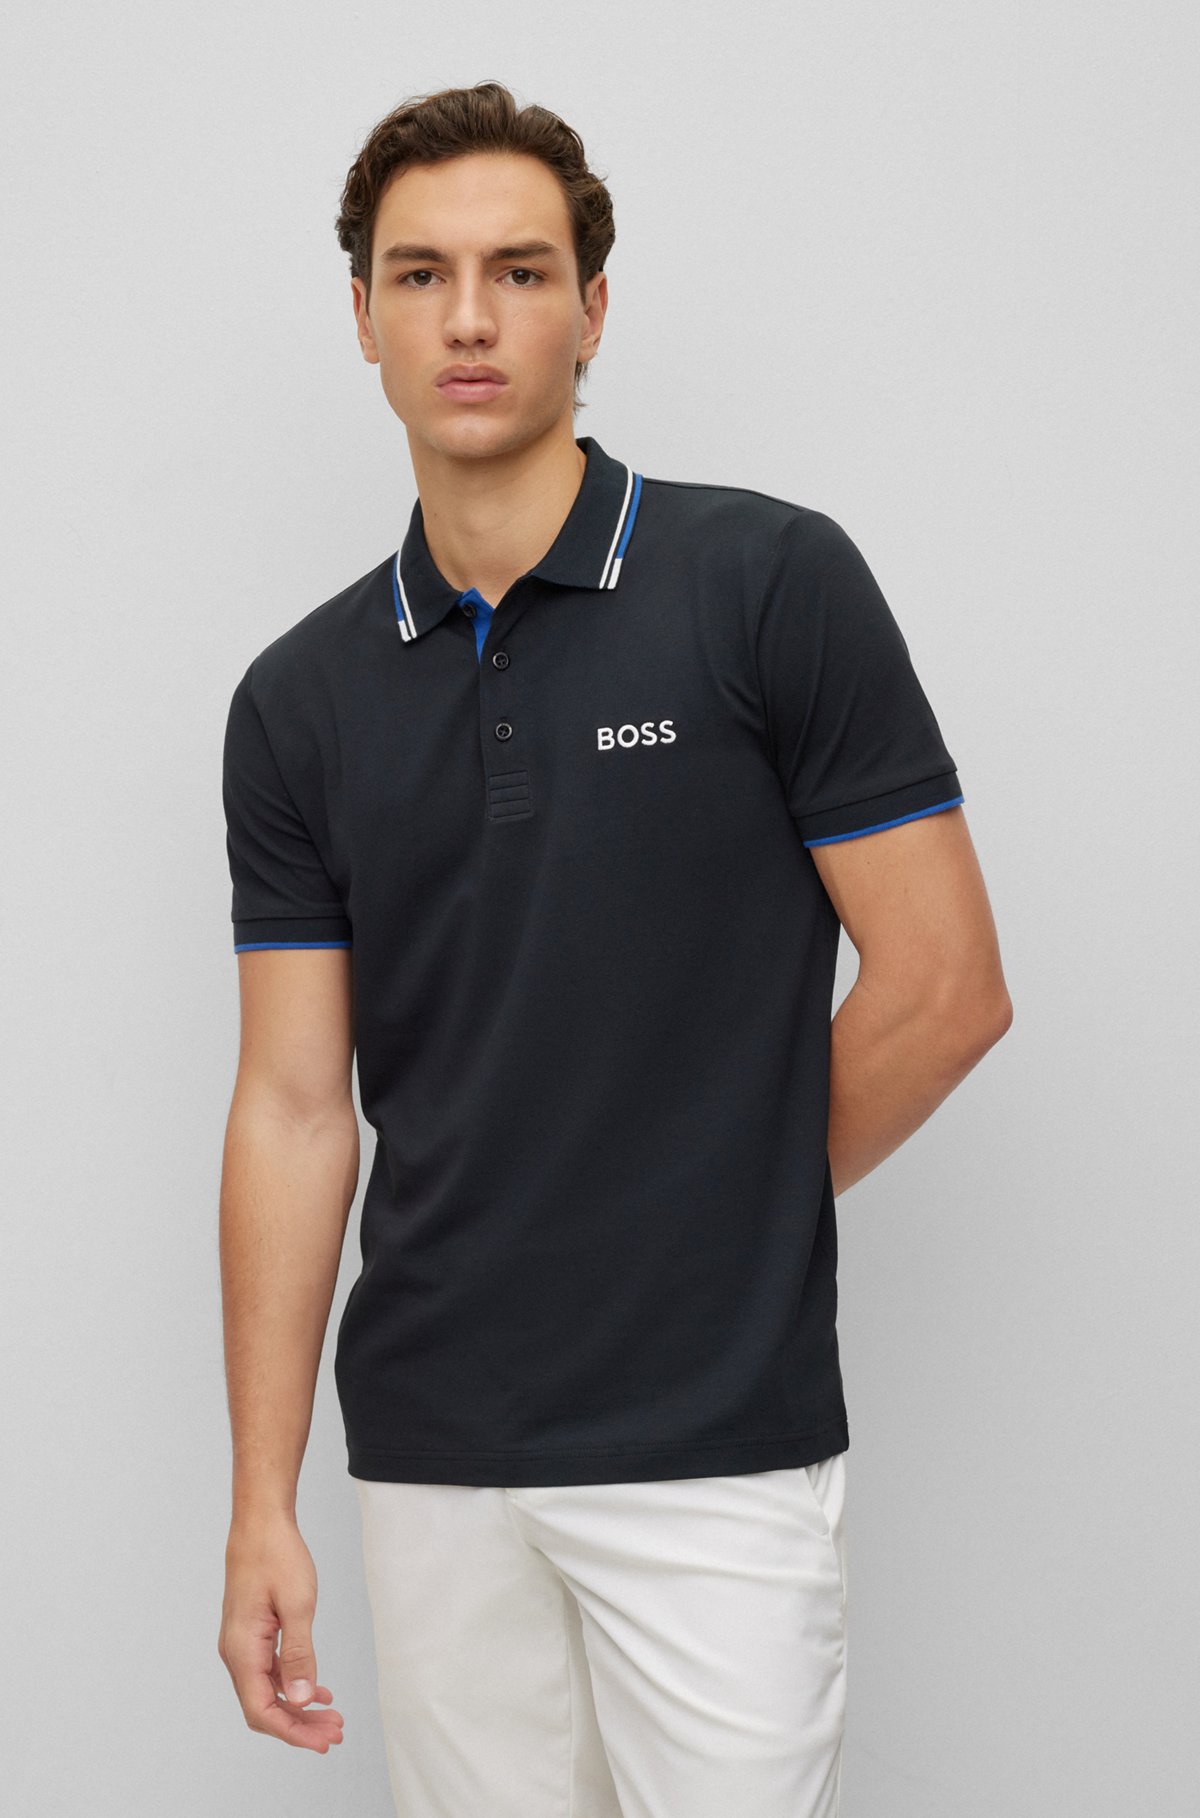 Distrahere Supersonic hastighed indgang BOSS - Cotton-blend polo shirt with contrast logos